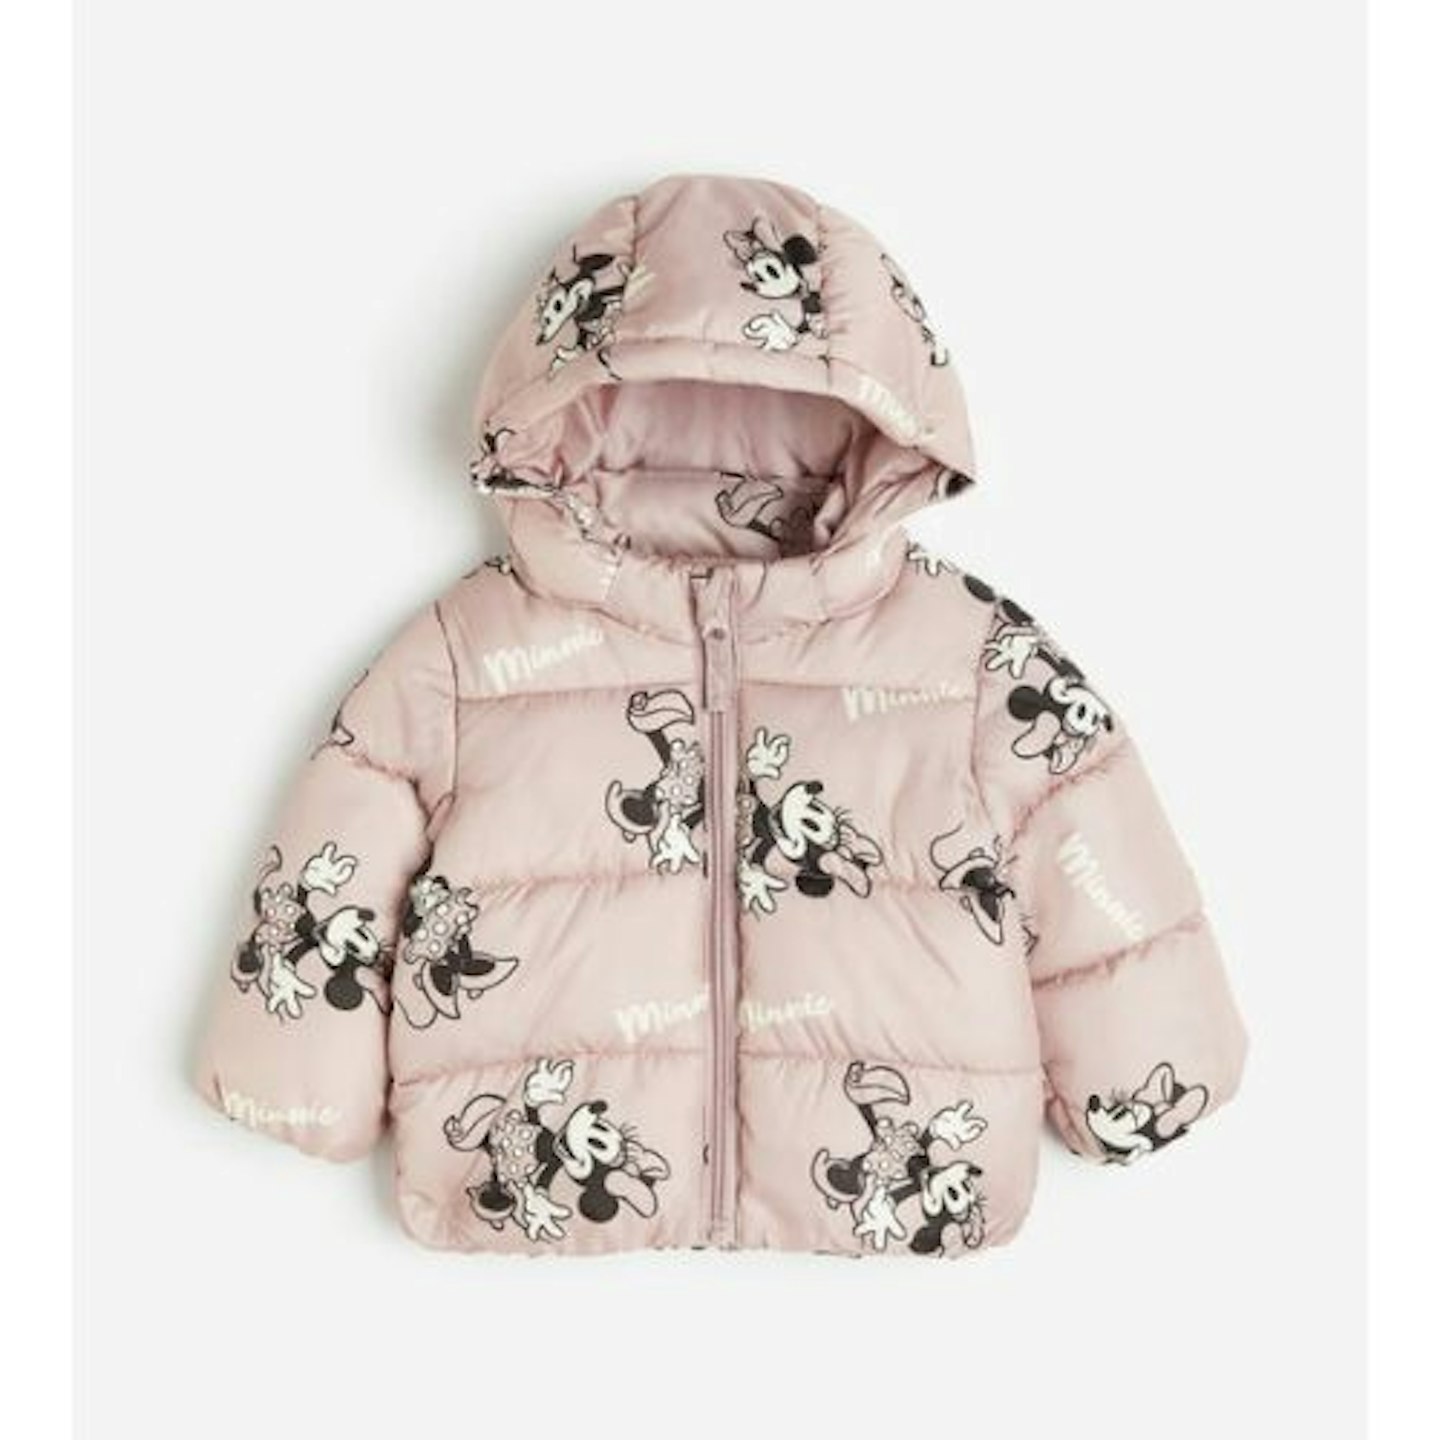 Best Disney clothes for baby Patterned Puffer Jacket